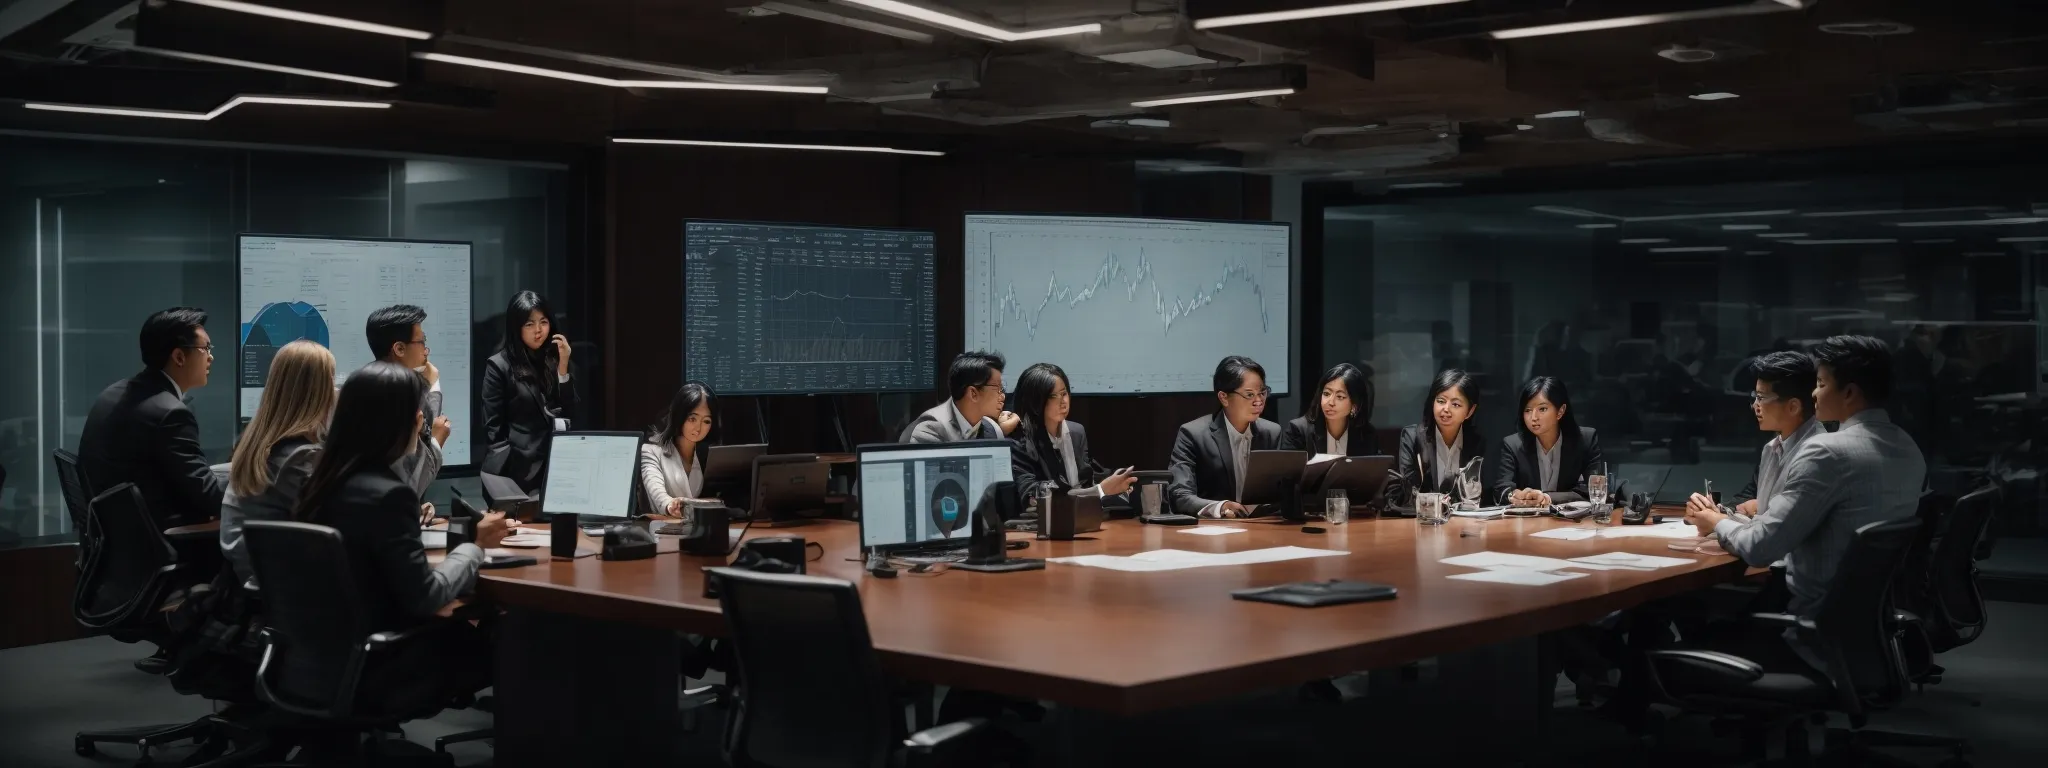 a group of professionals gathered around a conference table, poring over charts and digital analytics on a large screen.